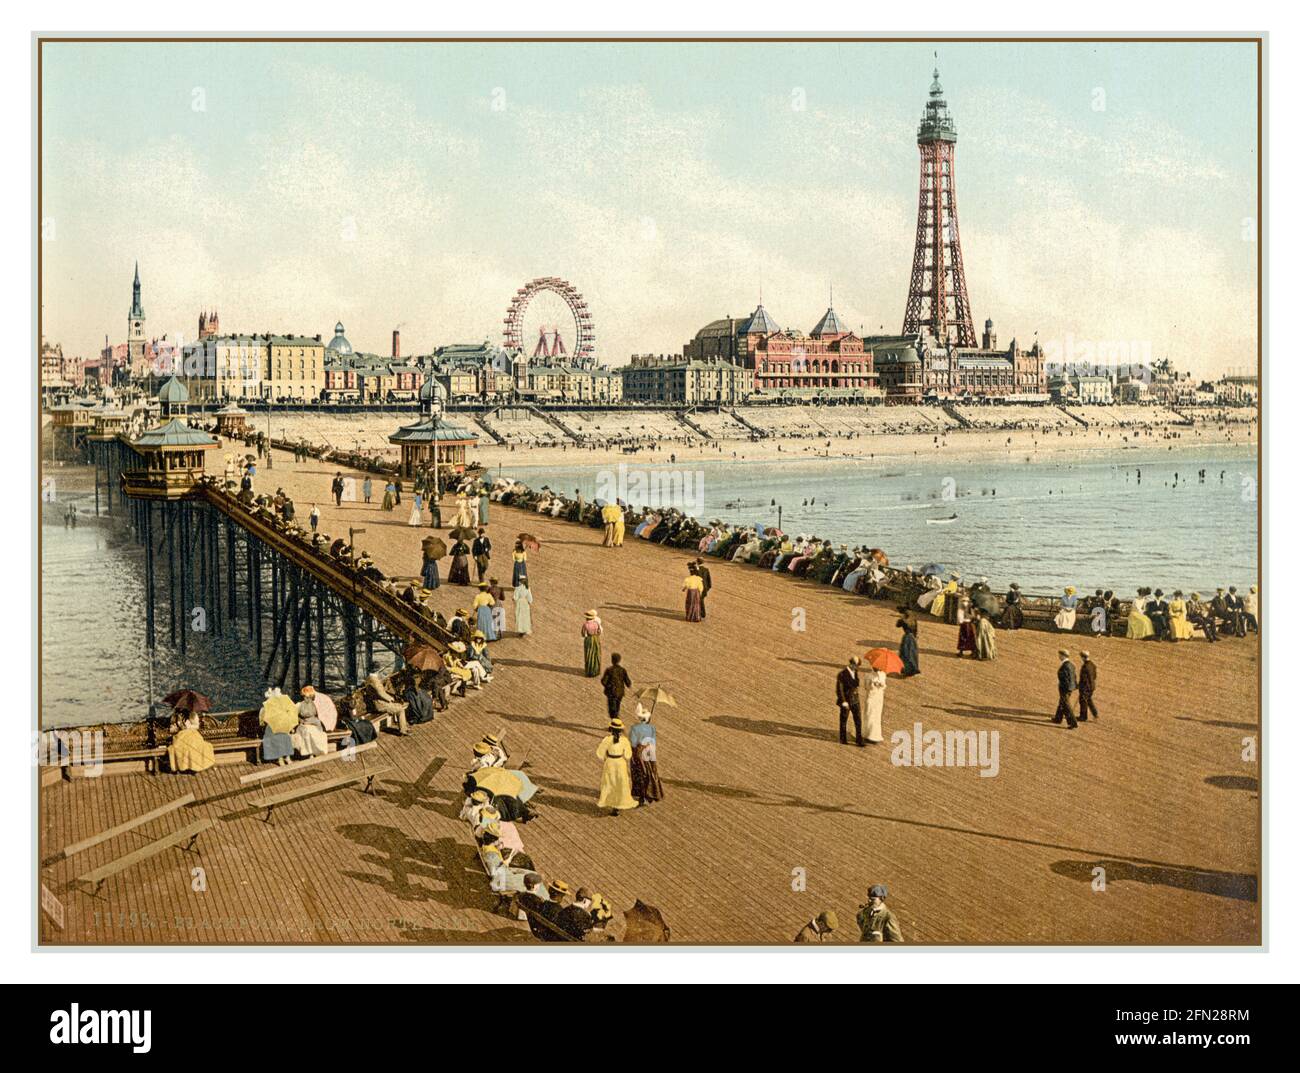 BLACKPOOL PEOPLE VACATION VINTAGE PHOTOCHROM 1890's Blackpool Vintage Retro Chromolith Photochrom Pleasure Beach from North Pier with Blackpool Tower Behind Great Britain UK Stock Photo